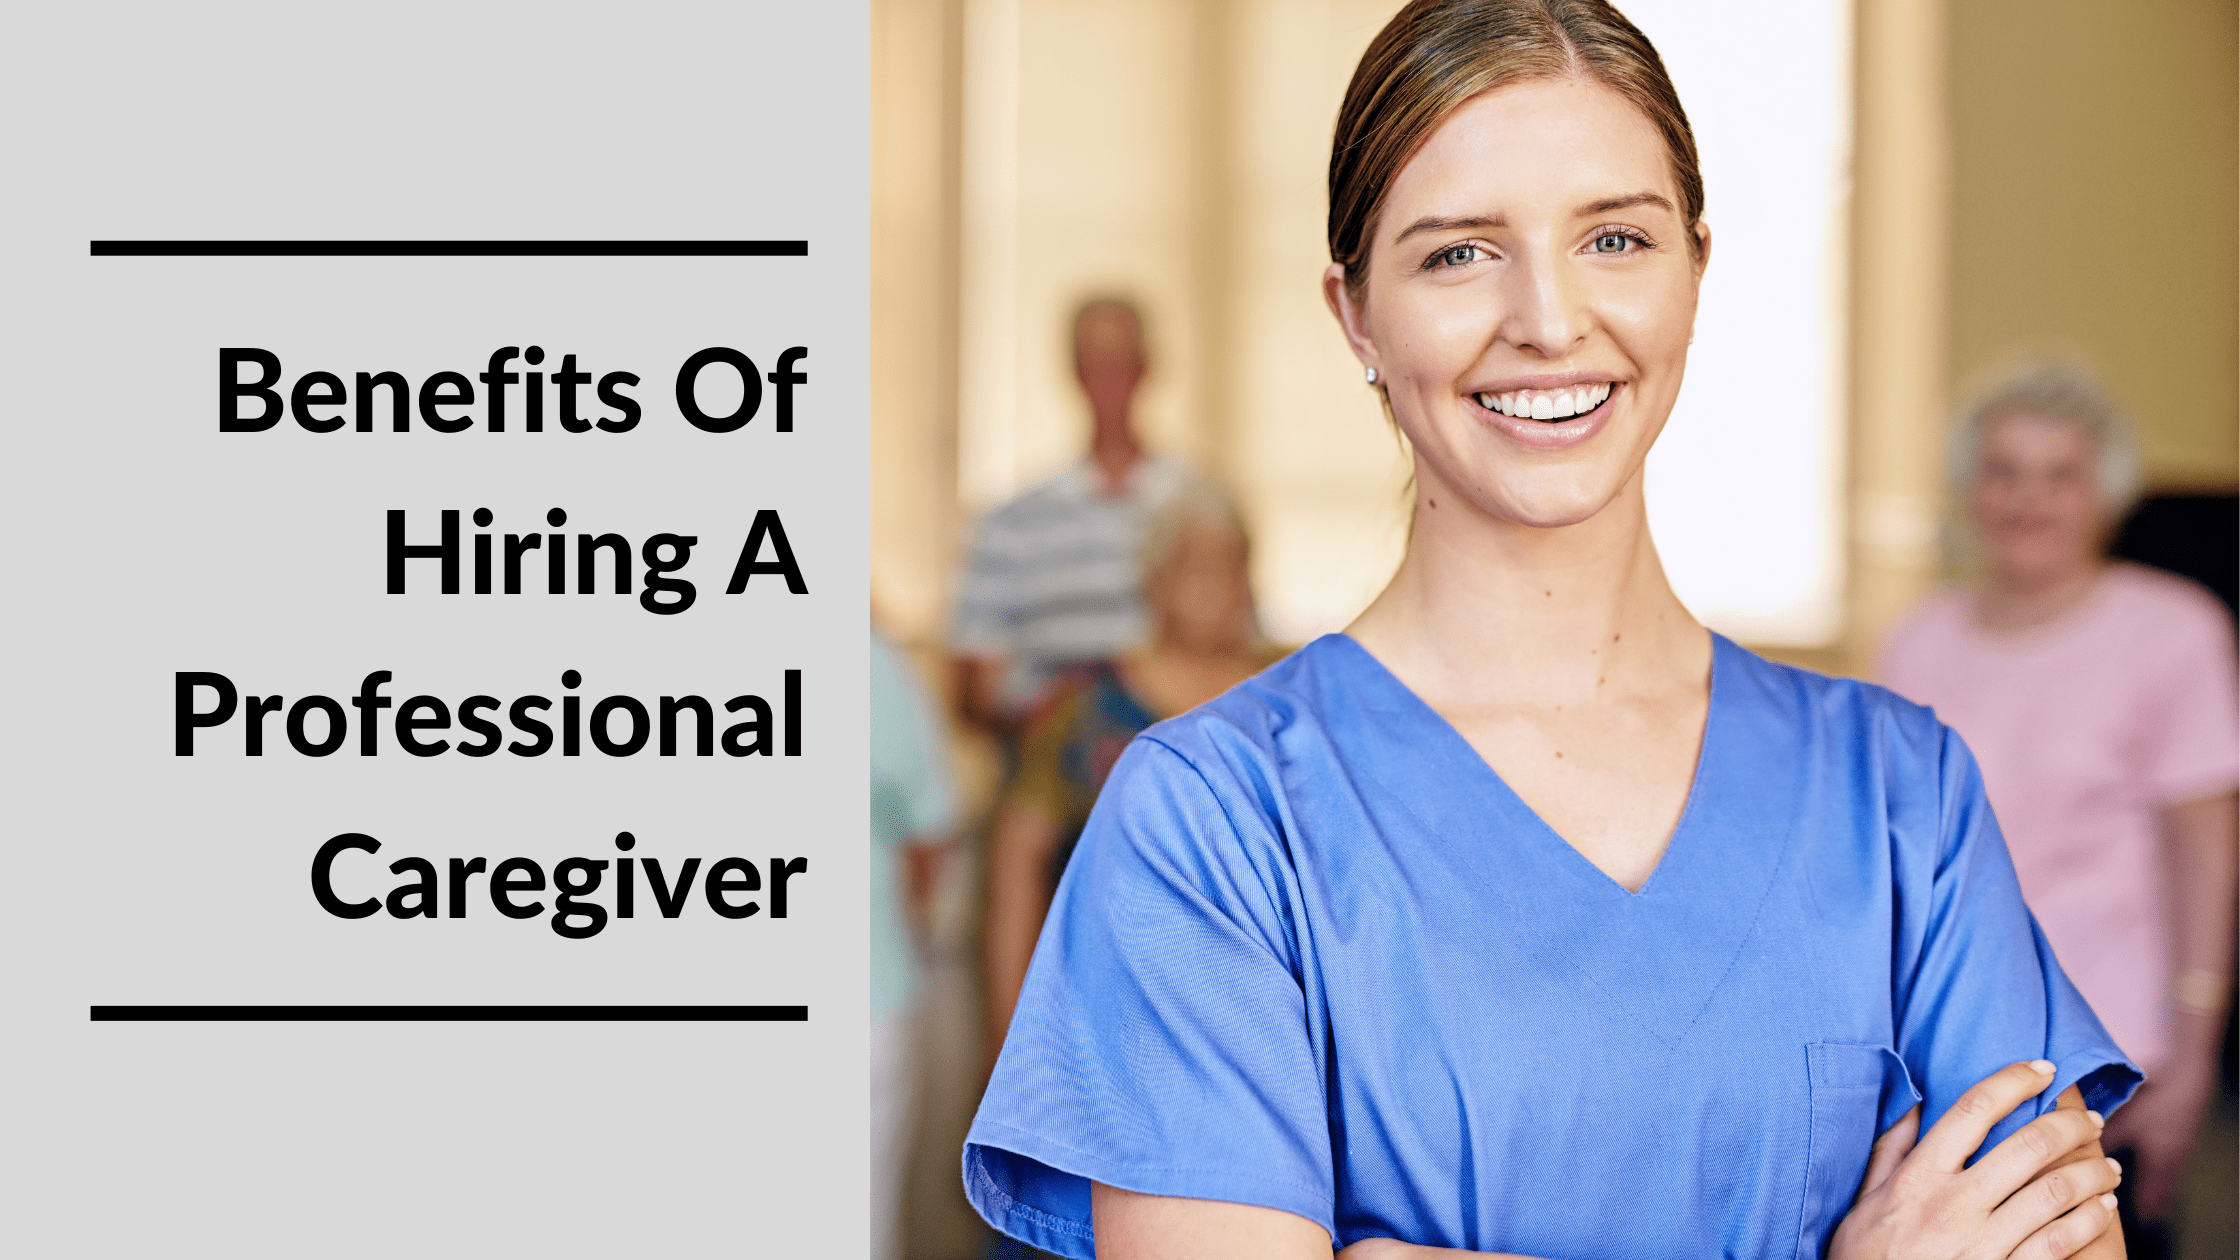 Benefits Of Hiring A Professional Caregiver Featured Image